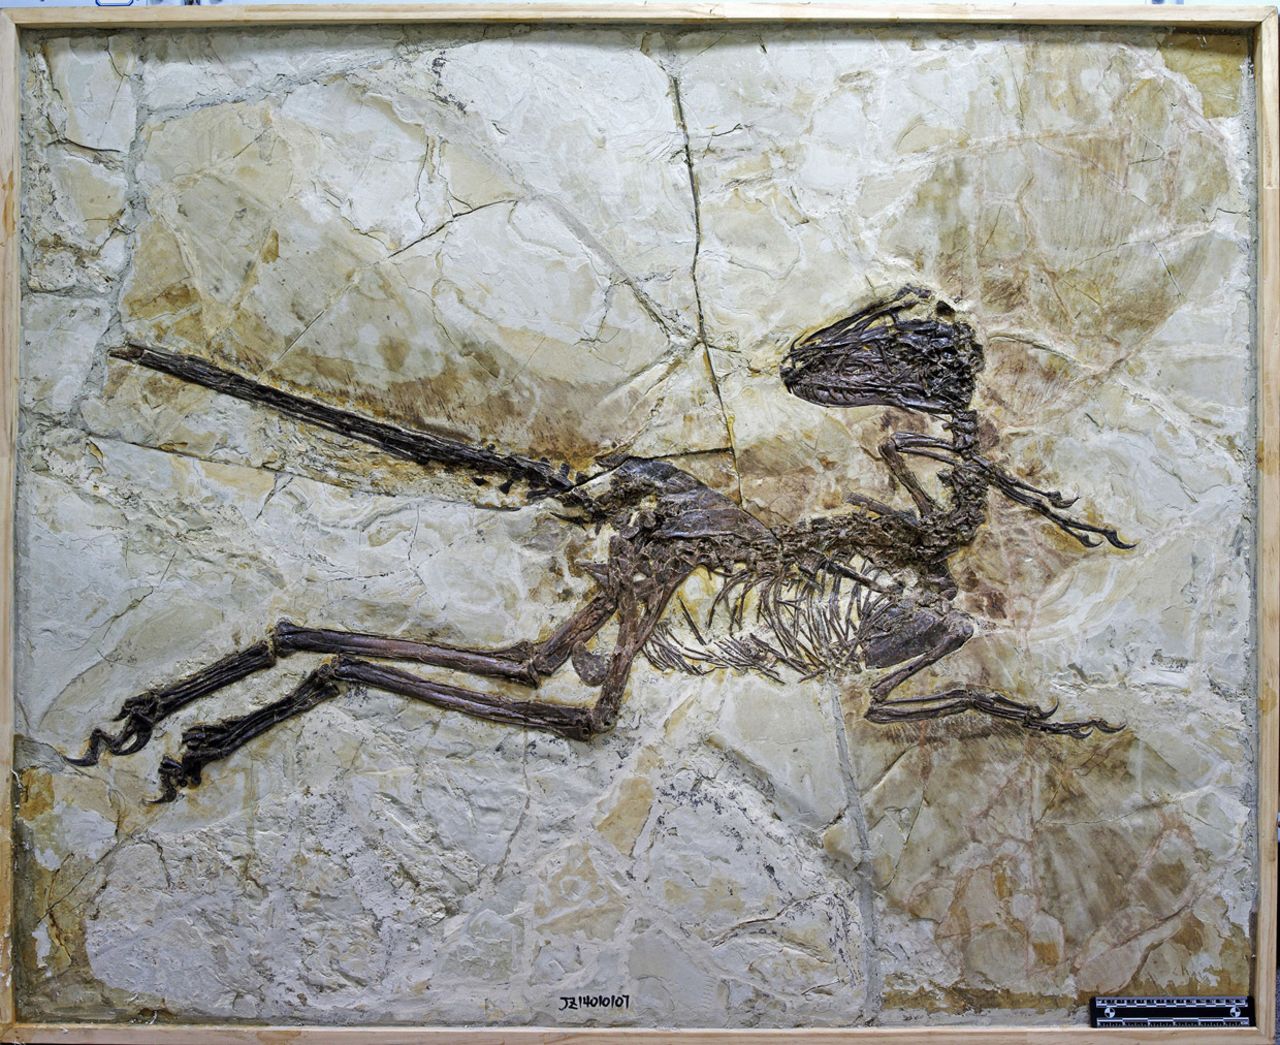 The fossil not only shows the complete skeleton of the animal, as well as its skull displayed in profile.  Clearly visible around the creature's short arms are a pattern of long feathers, which also appear to have decorated the dinosaur's tail. 